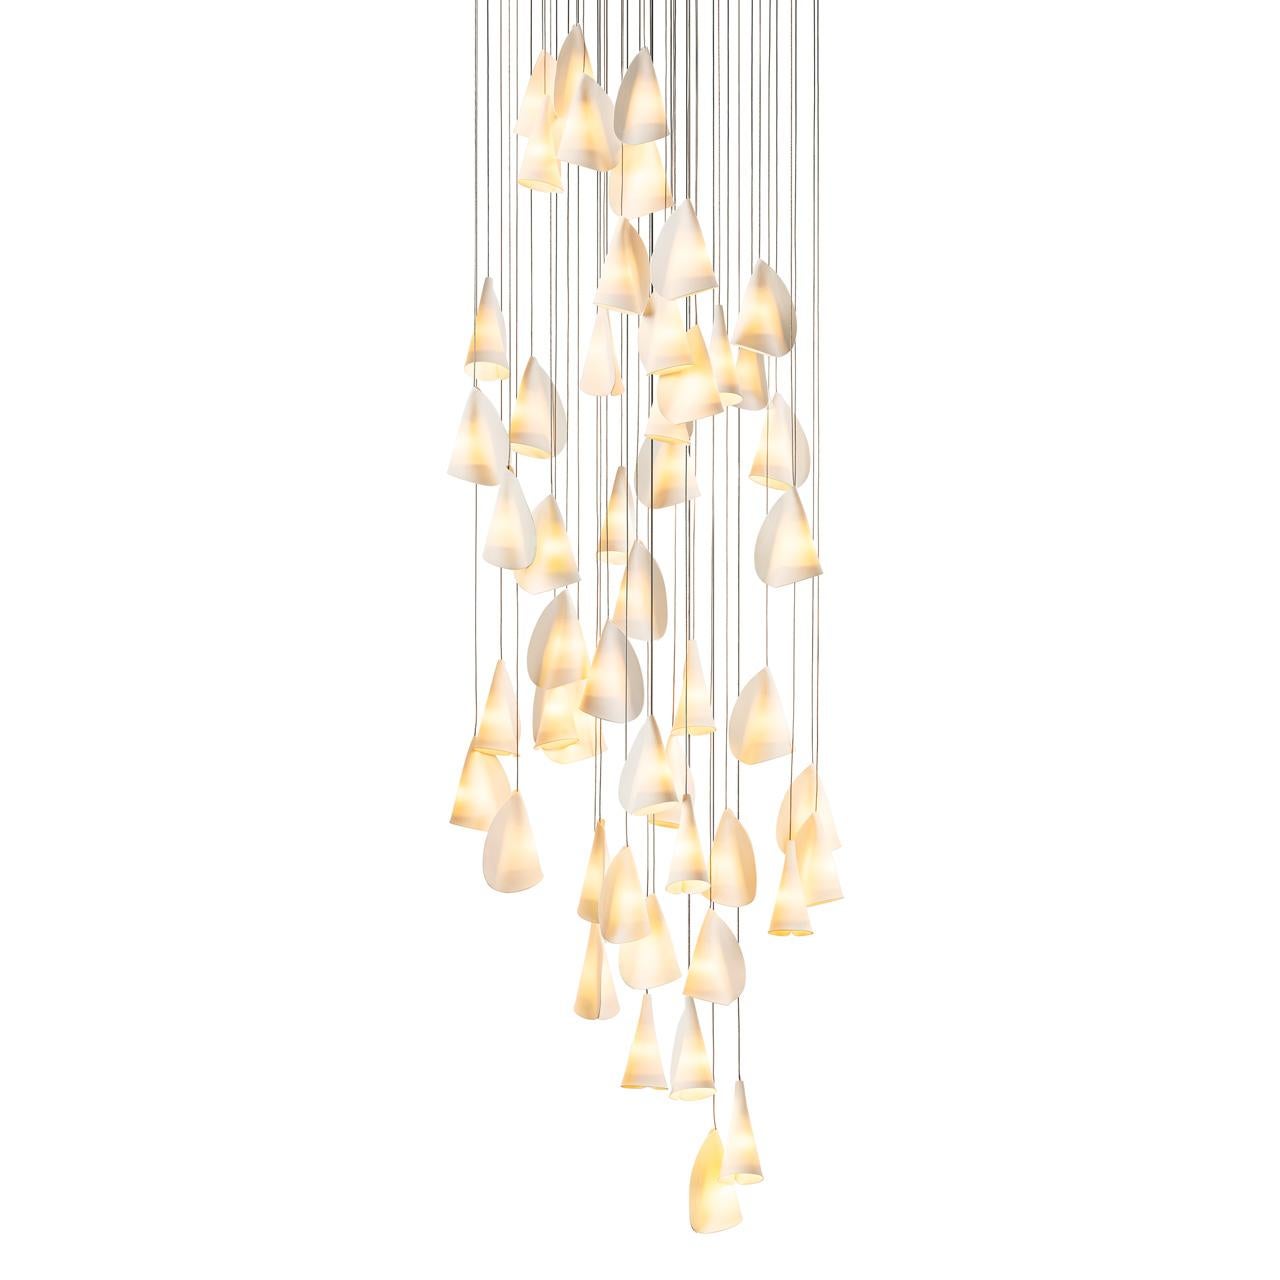 21.50 Porcelain chandelier lamp by Bocci
Dimensions: D 75.5 x W 75.5 x H 300 cm 
Materials: Porcelain, borosilicate glass, braided metal coaxial cable, electrical components, brushed nickel canopy. 
Lamping: 1.5w LED or 20w xenon. Non-dimmable.